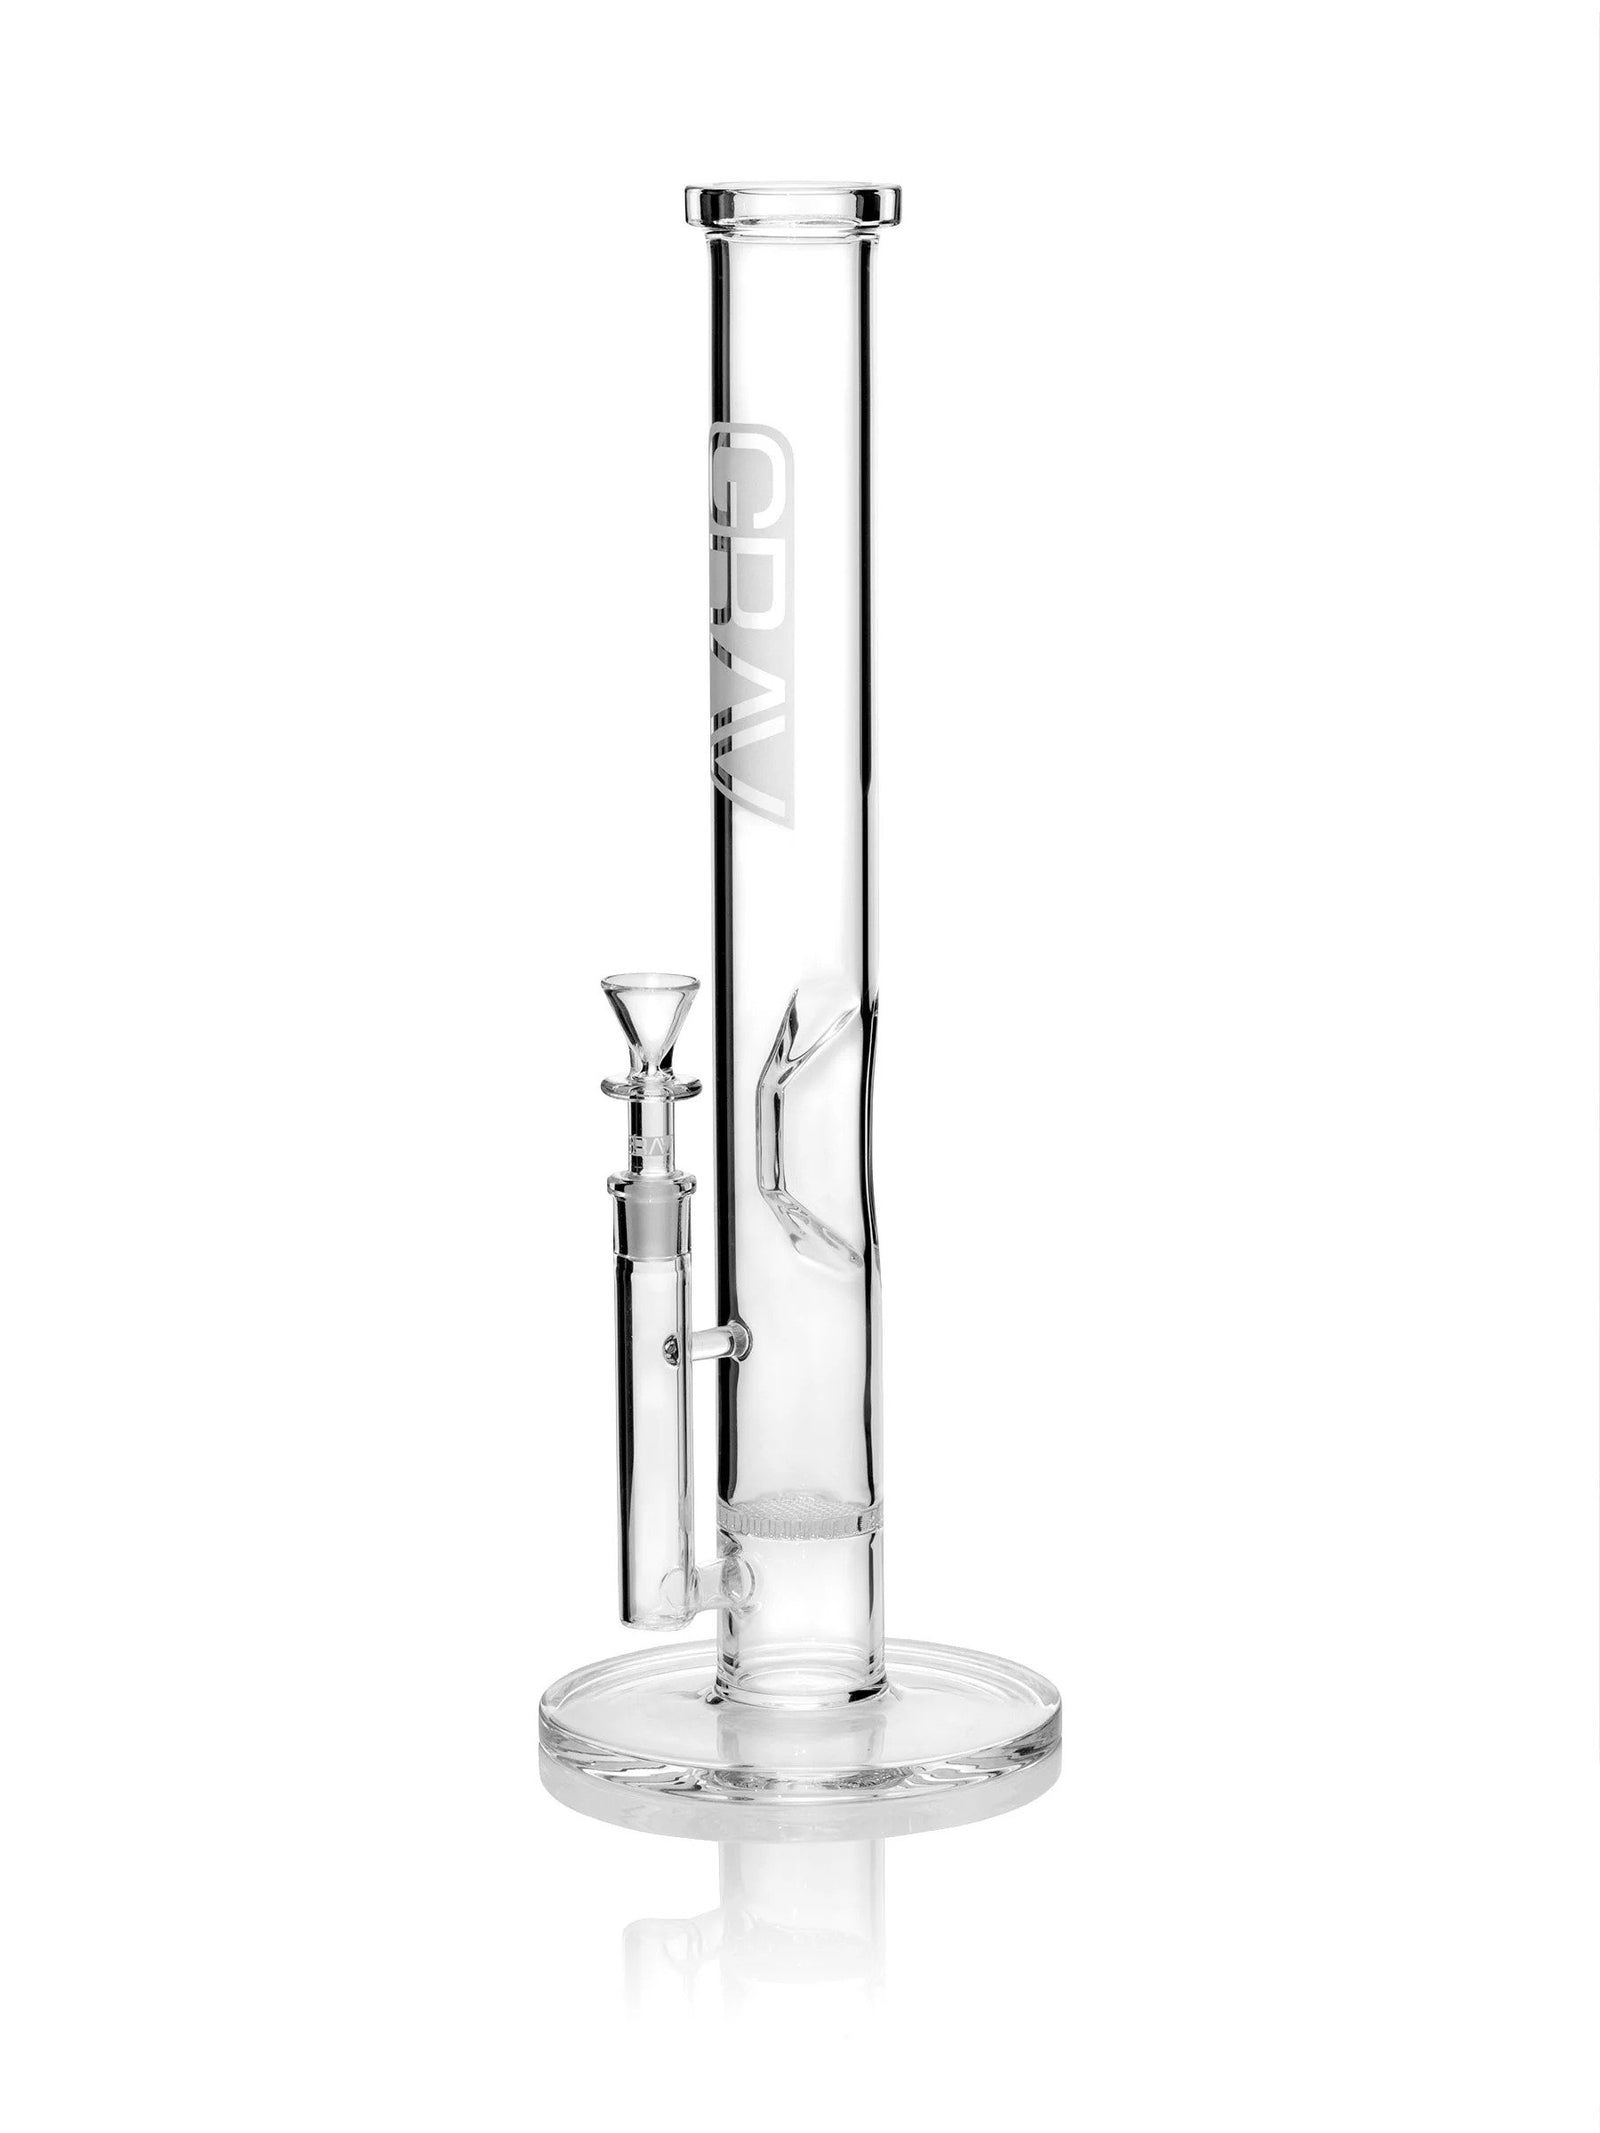 Dropshipping Mini Glass Bong Percolator Bubbler For Smoking Oil Rig With  Ash Catcher And Heady Tobacco Hookah Accessories From Dhgate0217, $4.71